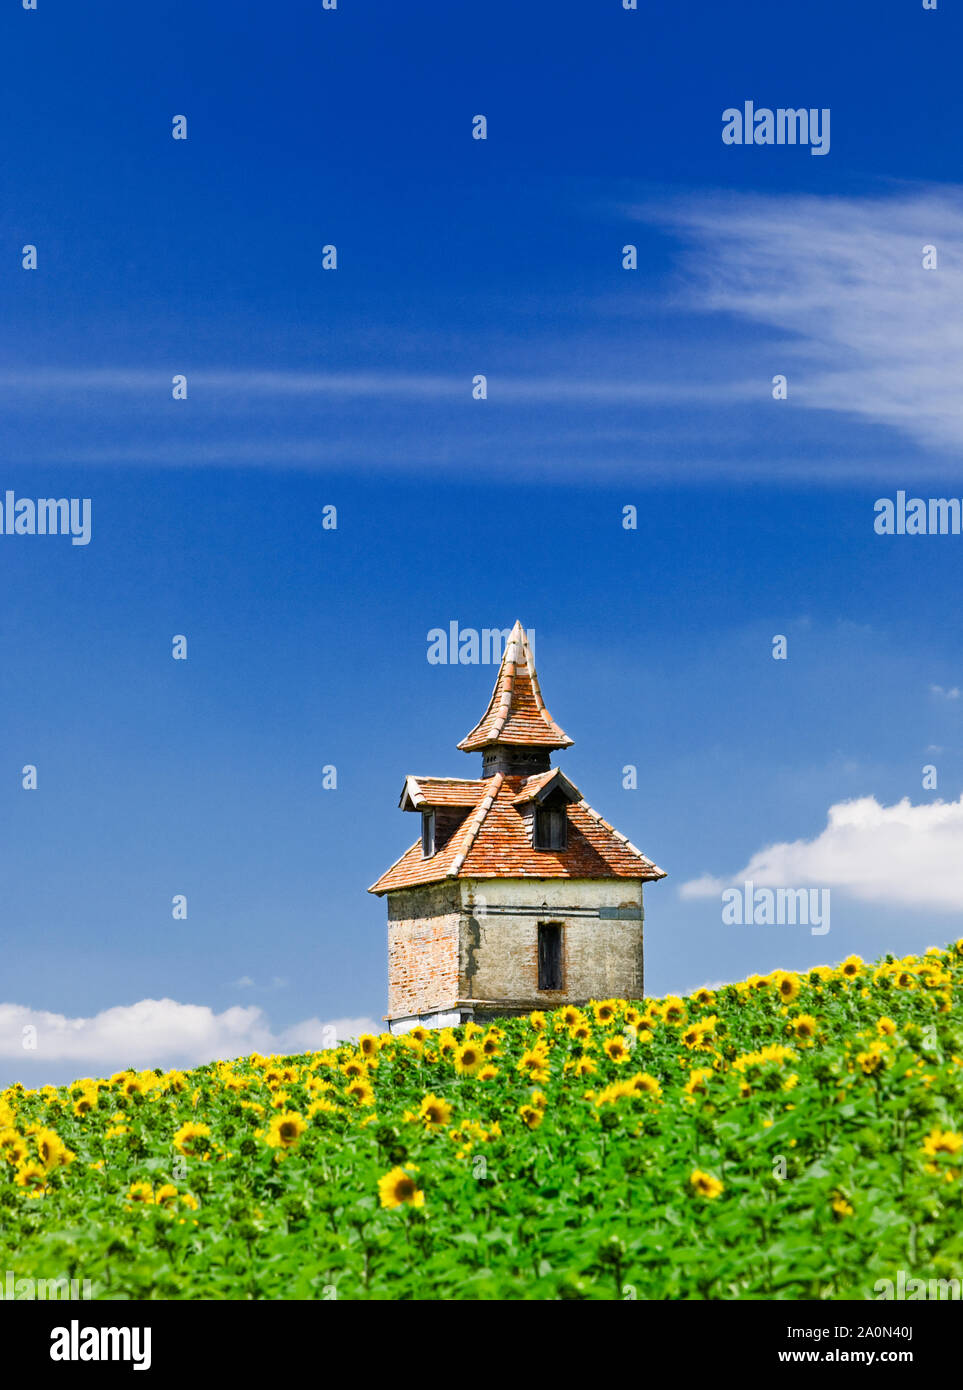 Pigeon loft or Pigeonniere in a field of Sunflowers in the South of France, Europe Stock Photo